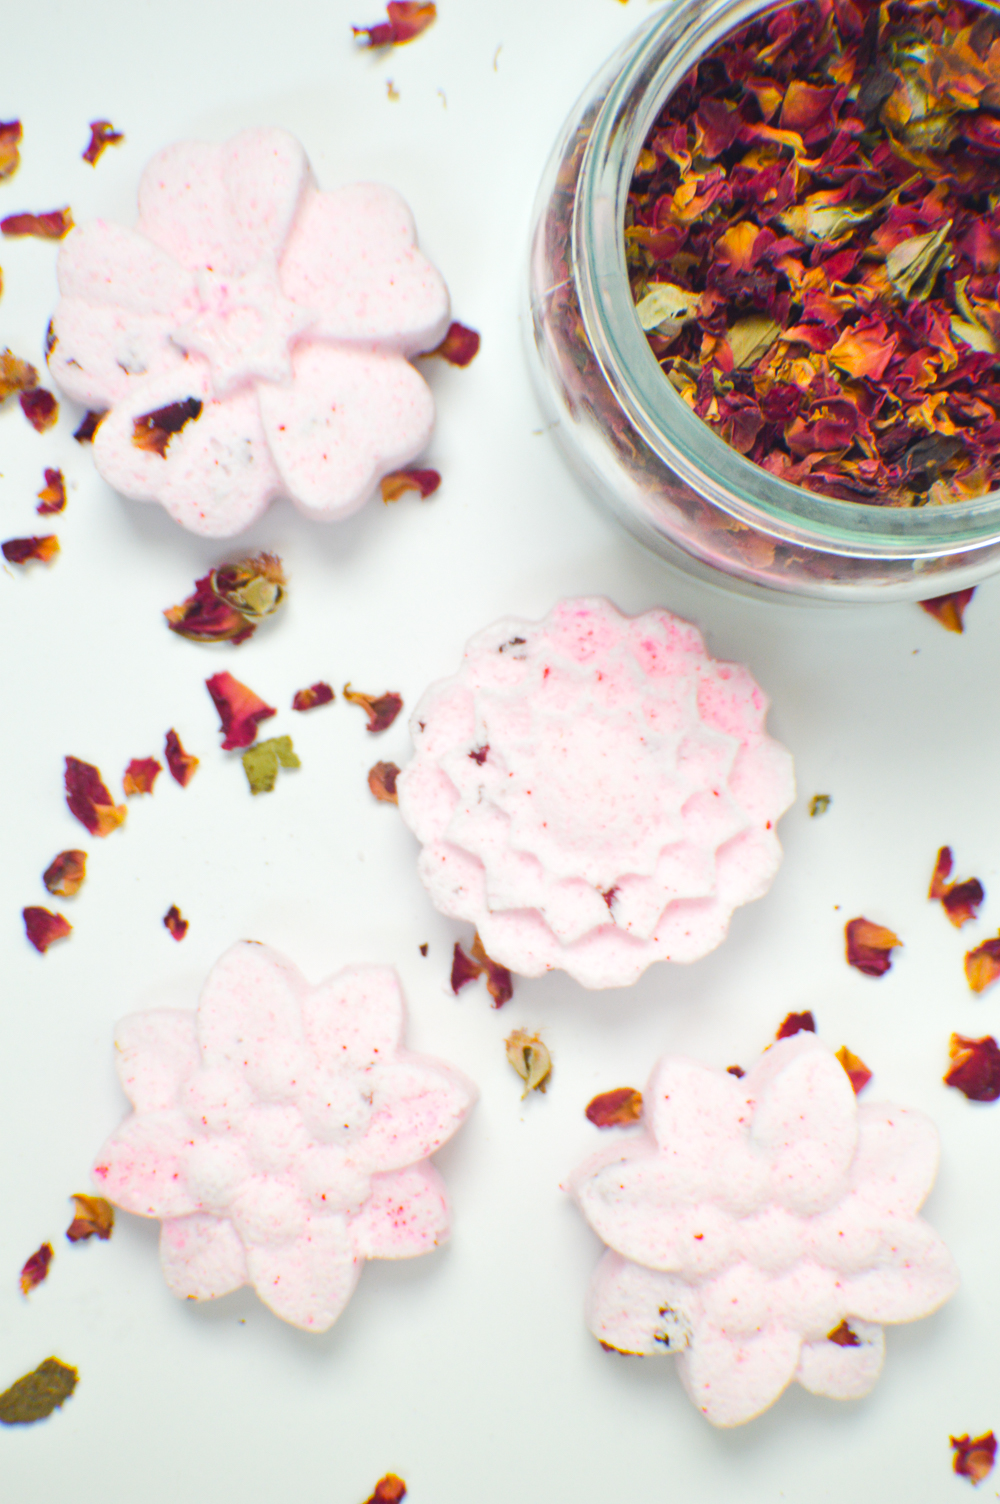 Relax in Your Tub with 19 Luxurious DIY Bath Bombs